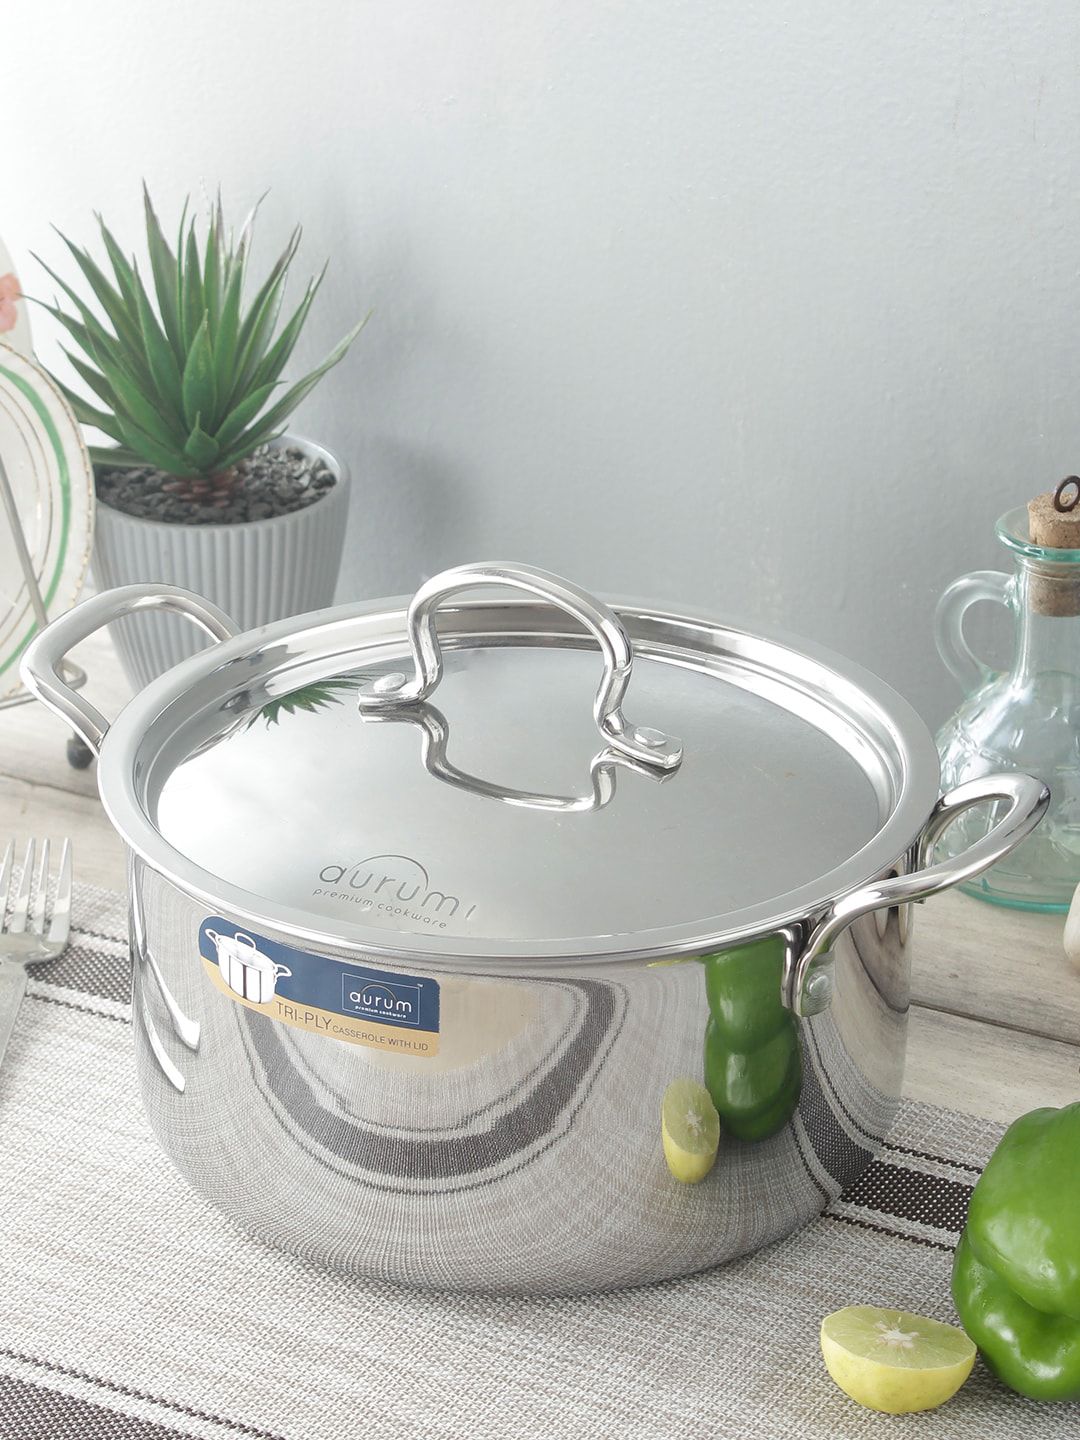 Aurum Triply Casserole with Stainless Steel Lid 5.5 Litre Price in India